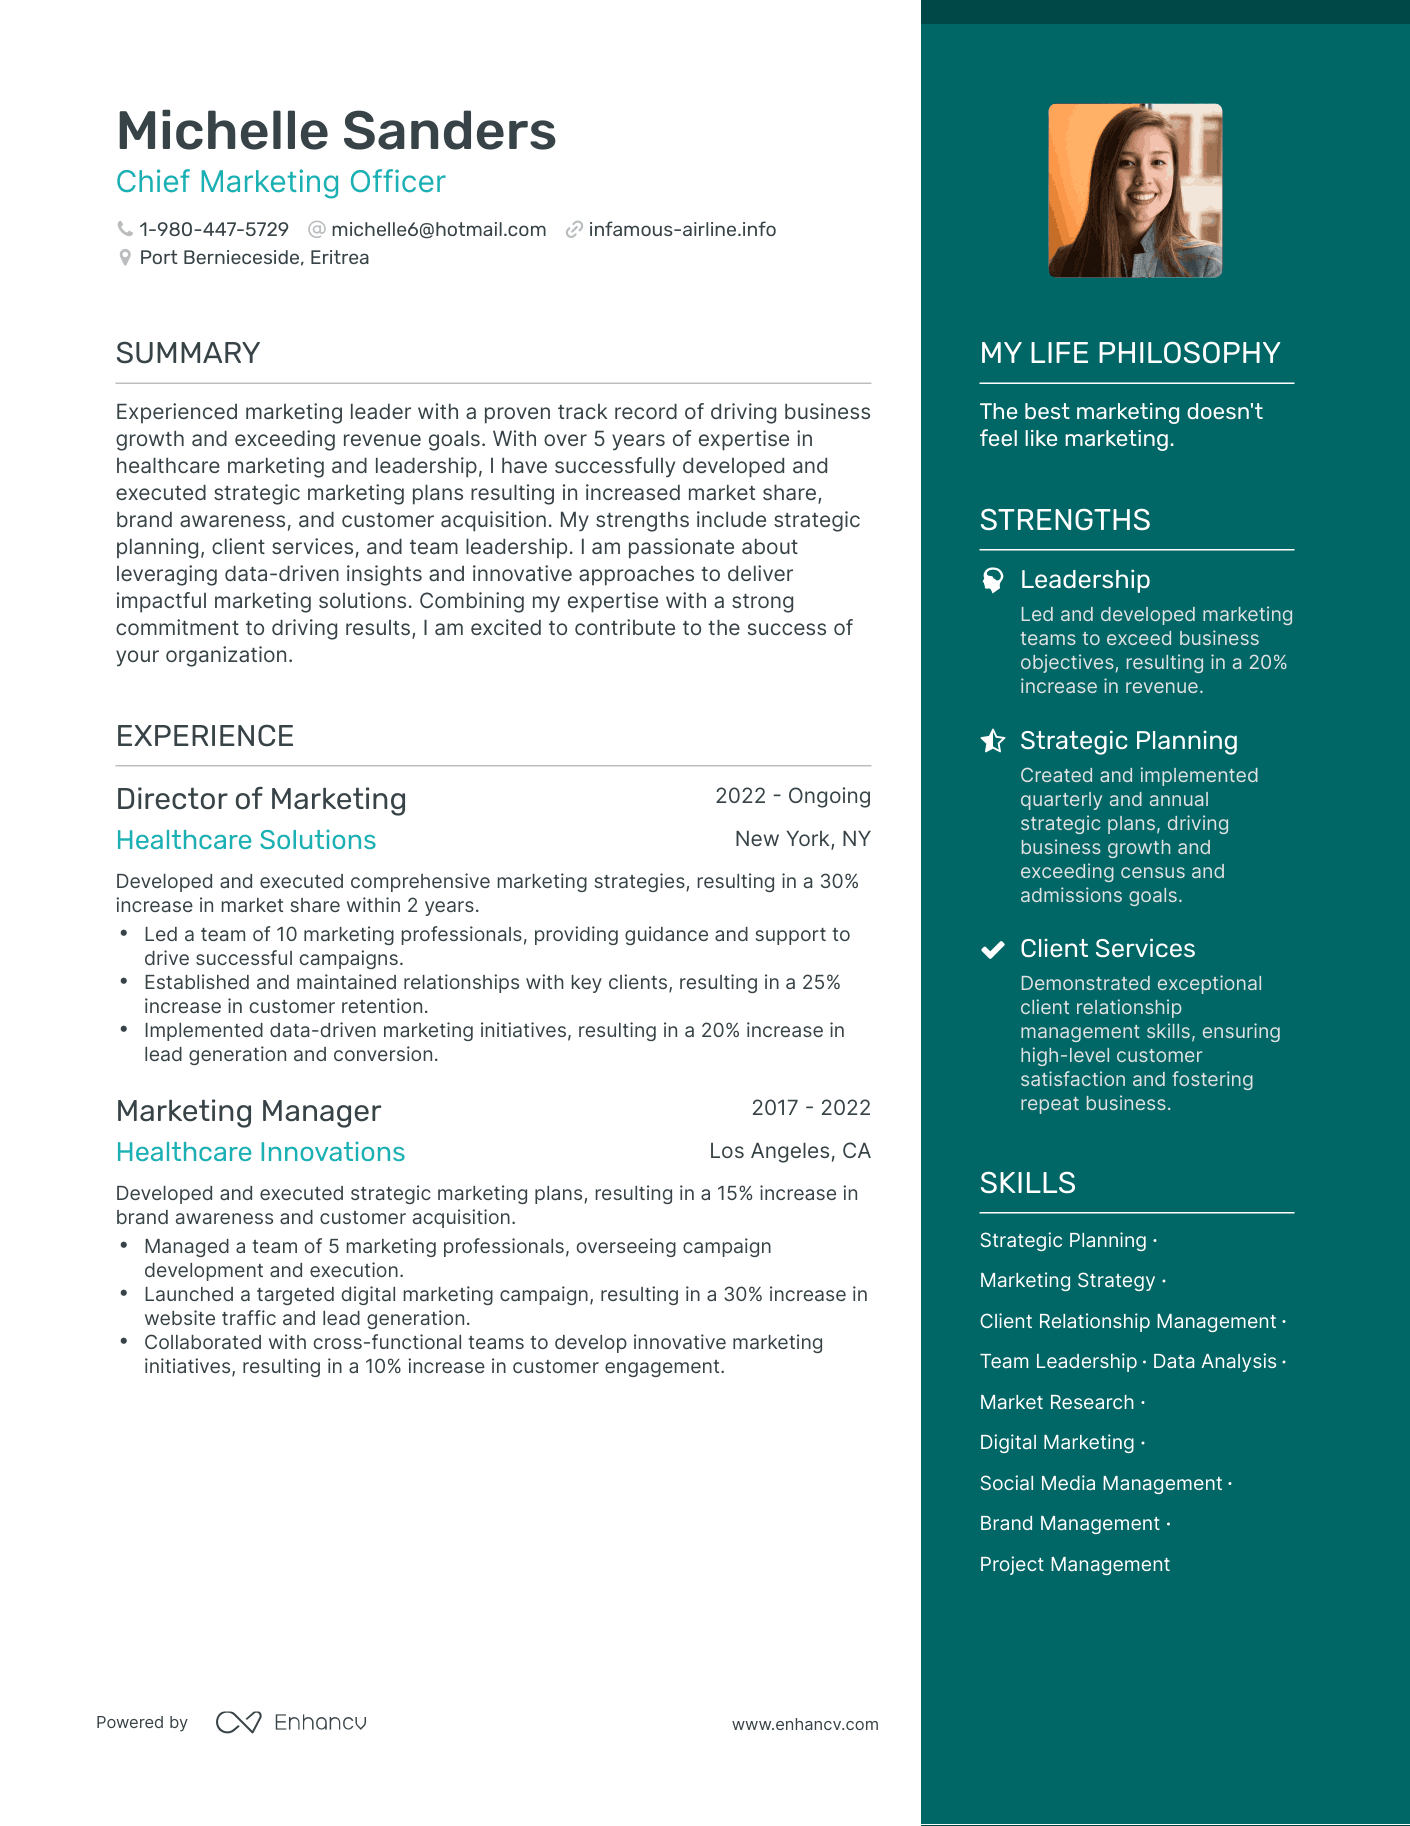 Chief Marketing Officer resume example